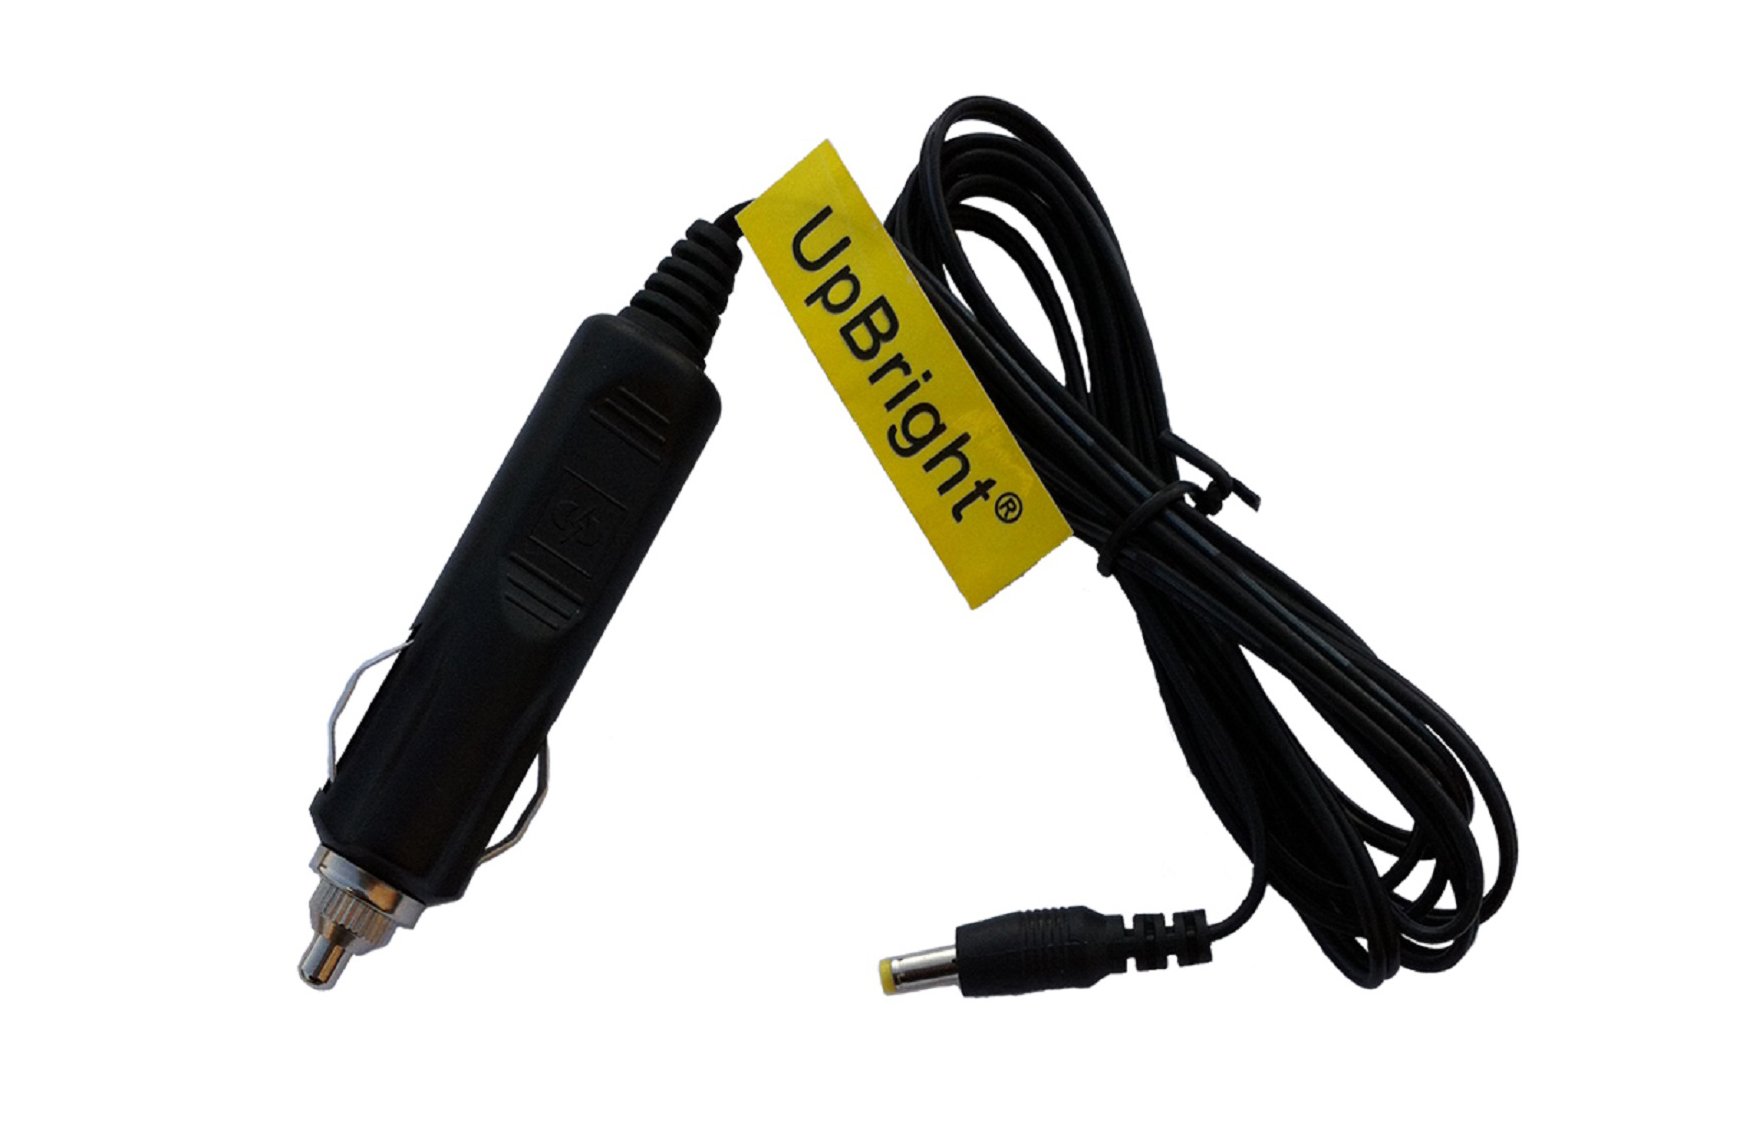 UpBright¨ New Car 12V DC Adapter for Insignia NS-D9PDVD15 I-P1020 I-PD720 IS-PD040922 IS-PD101351 IS-PD7BL NS-7PDVD NS-8PDVDA NS-PDVD10 NS-PDVD10 NS-SKPDVD DVD Player Power Supply (w/One Output Tip)